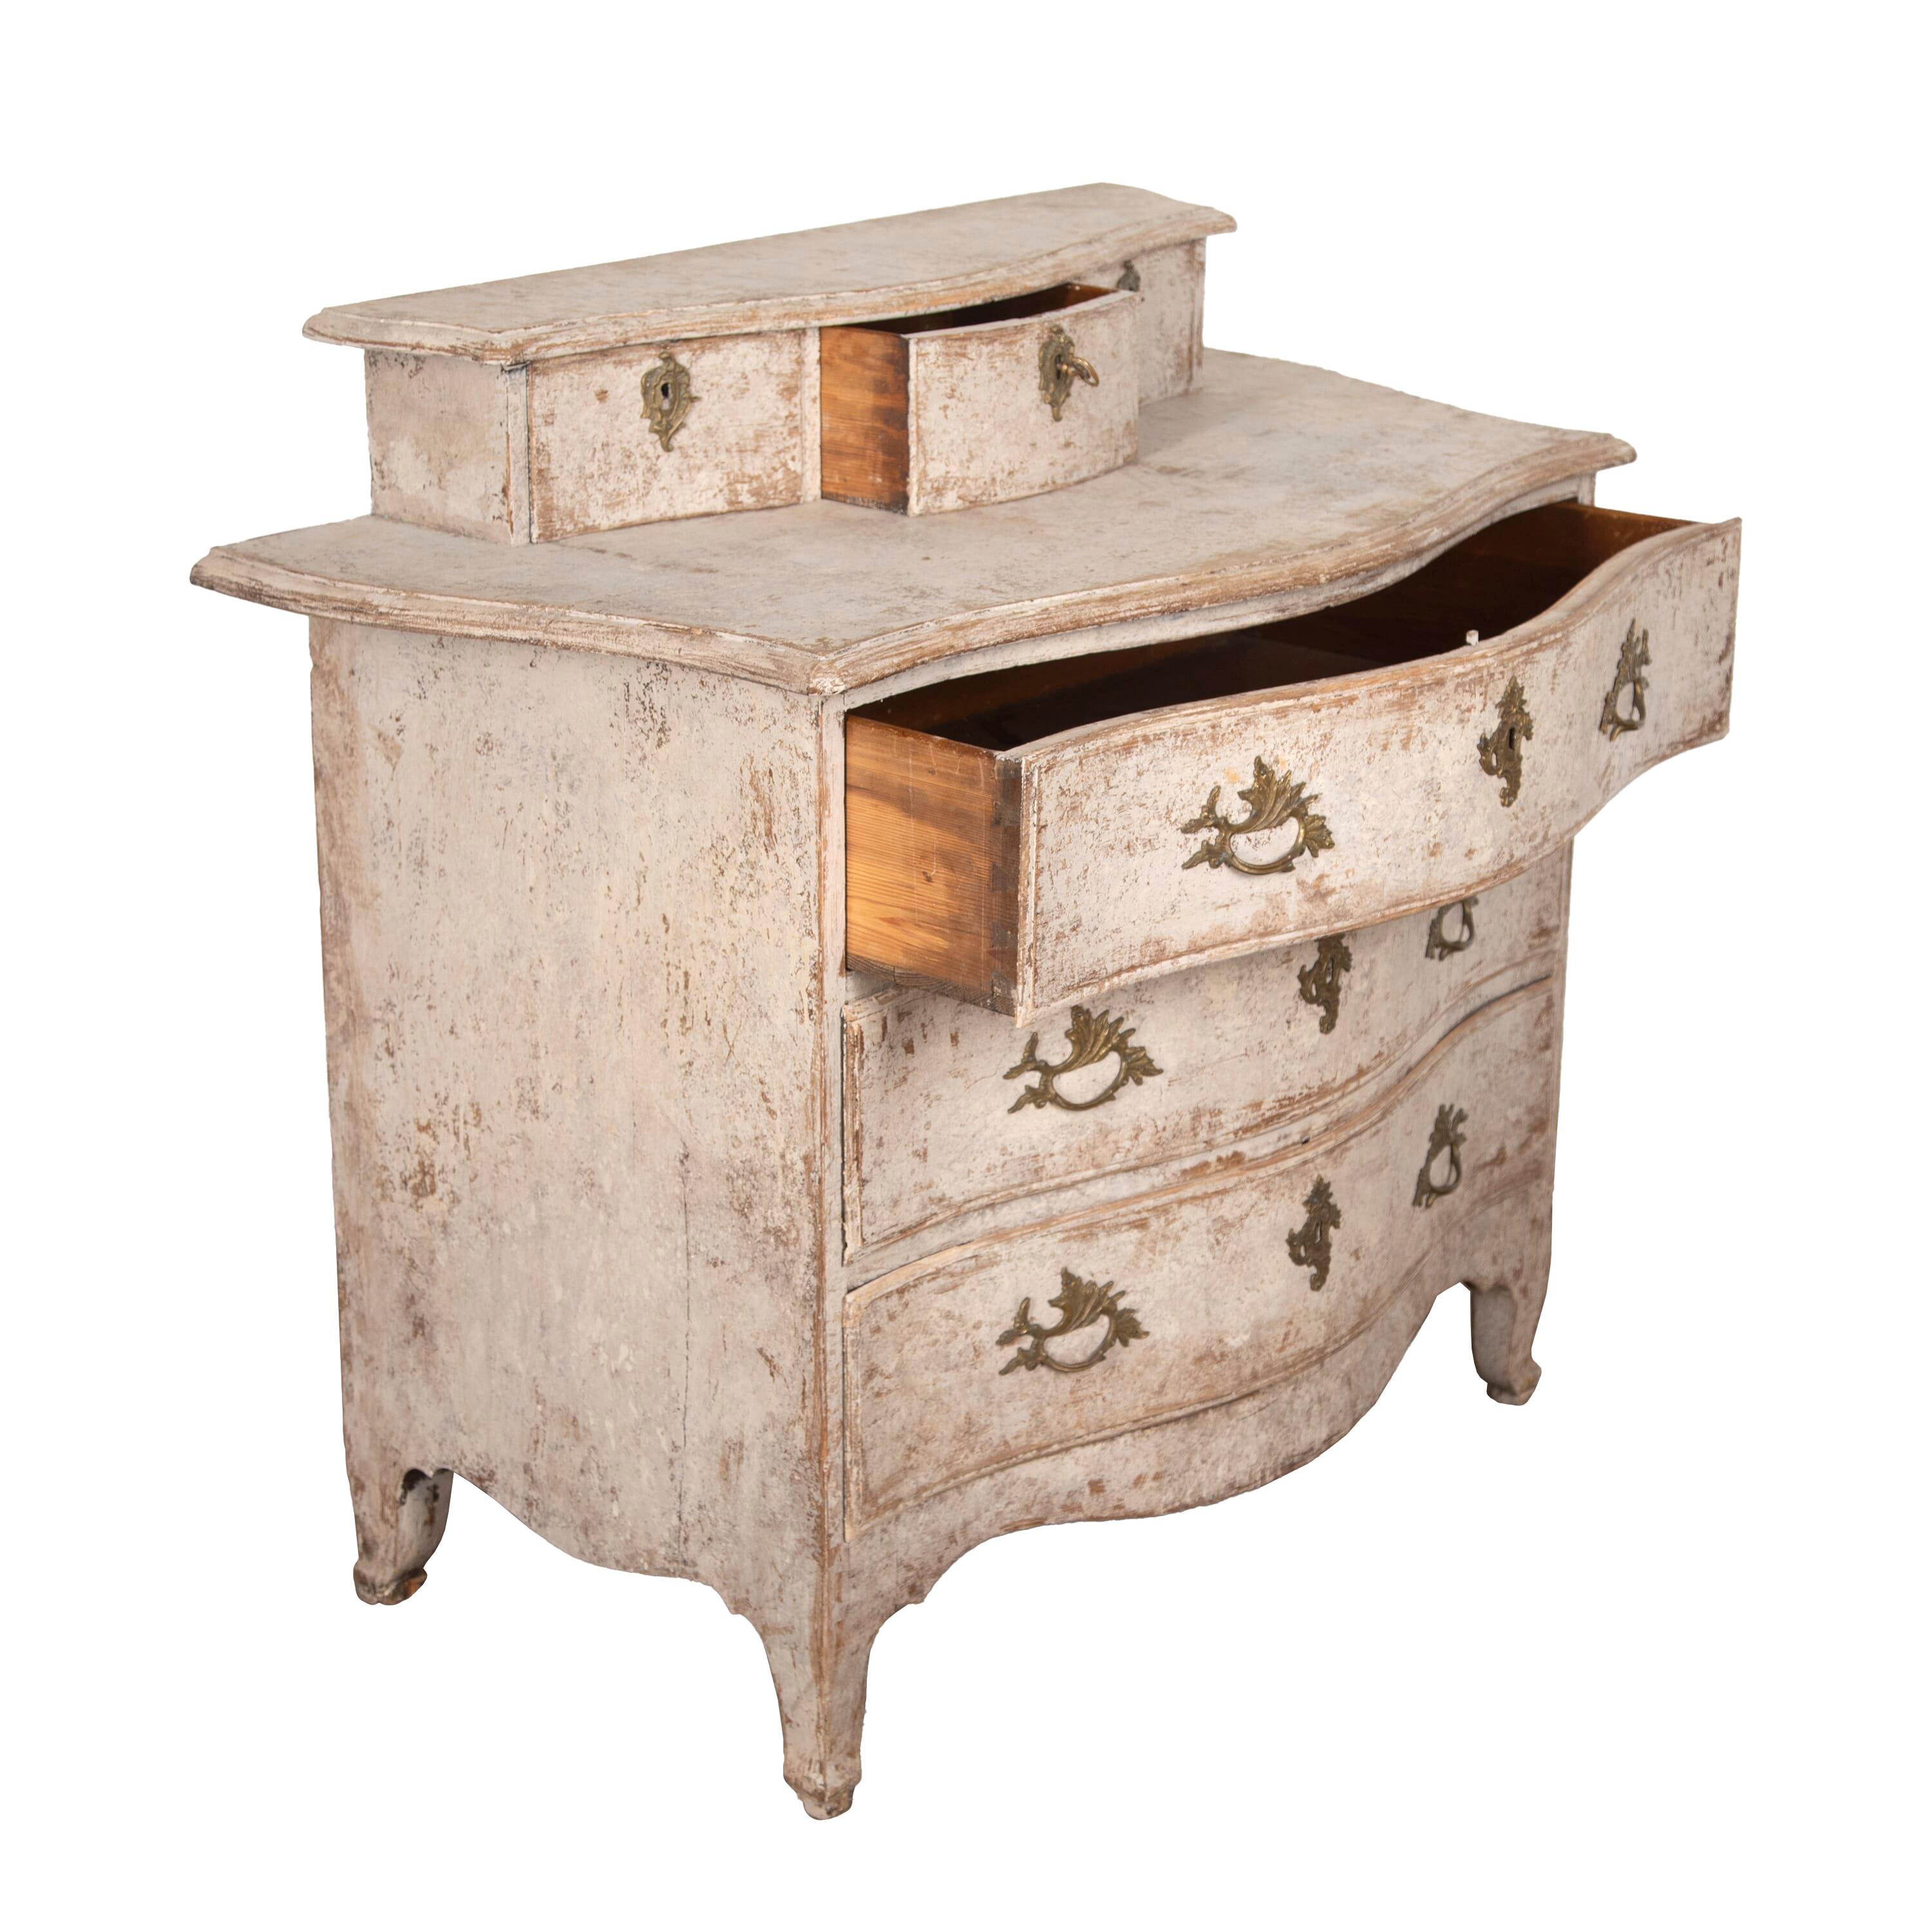 18th Century Period Rococo Commode In Good Condition For Sale In Tetbury, Gloucestershire